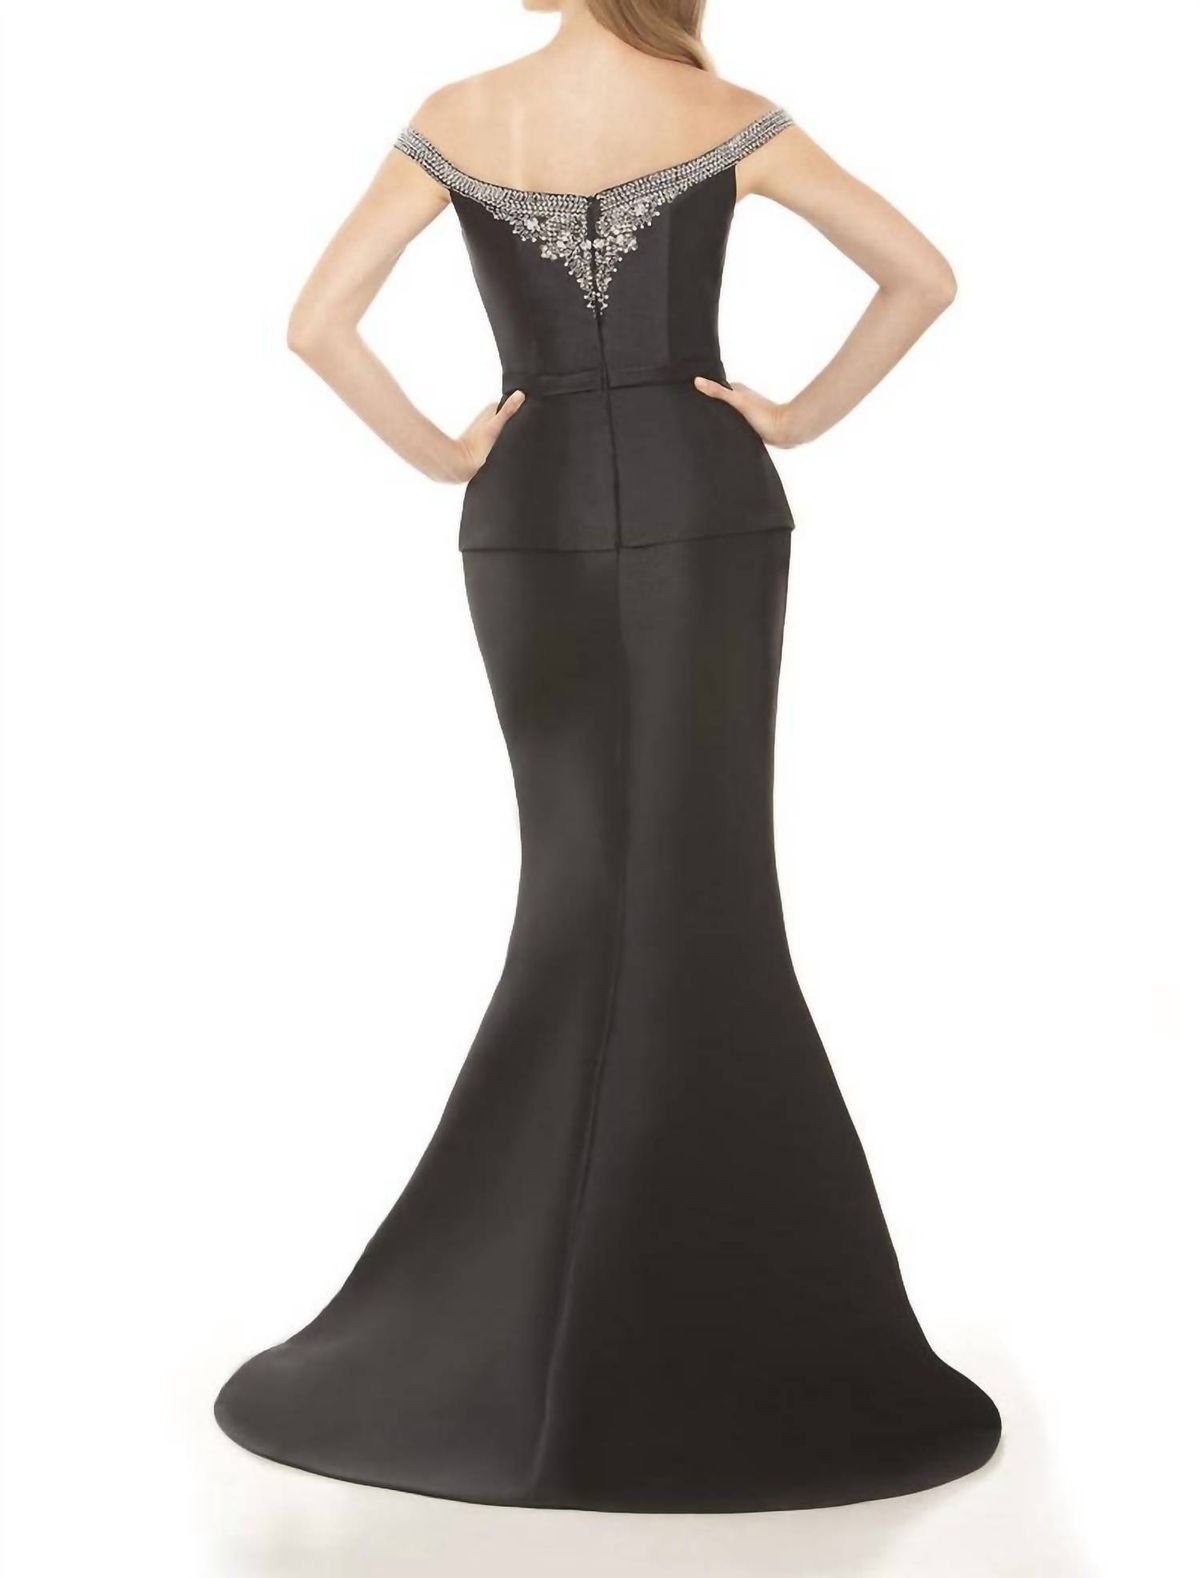 Style 1-4026689922-397 Elena Elias Size 14 Prom Off The Shoulder Sequined Black Mermaid Dress on Queenly